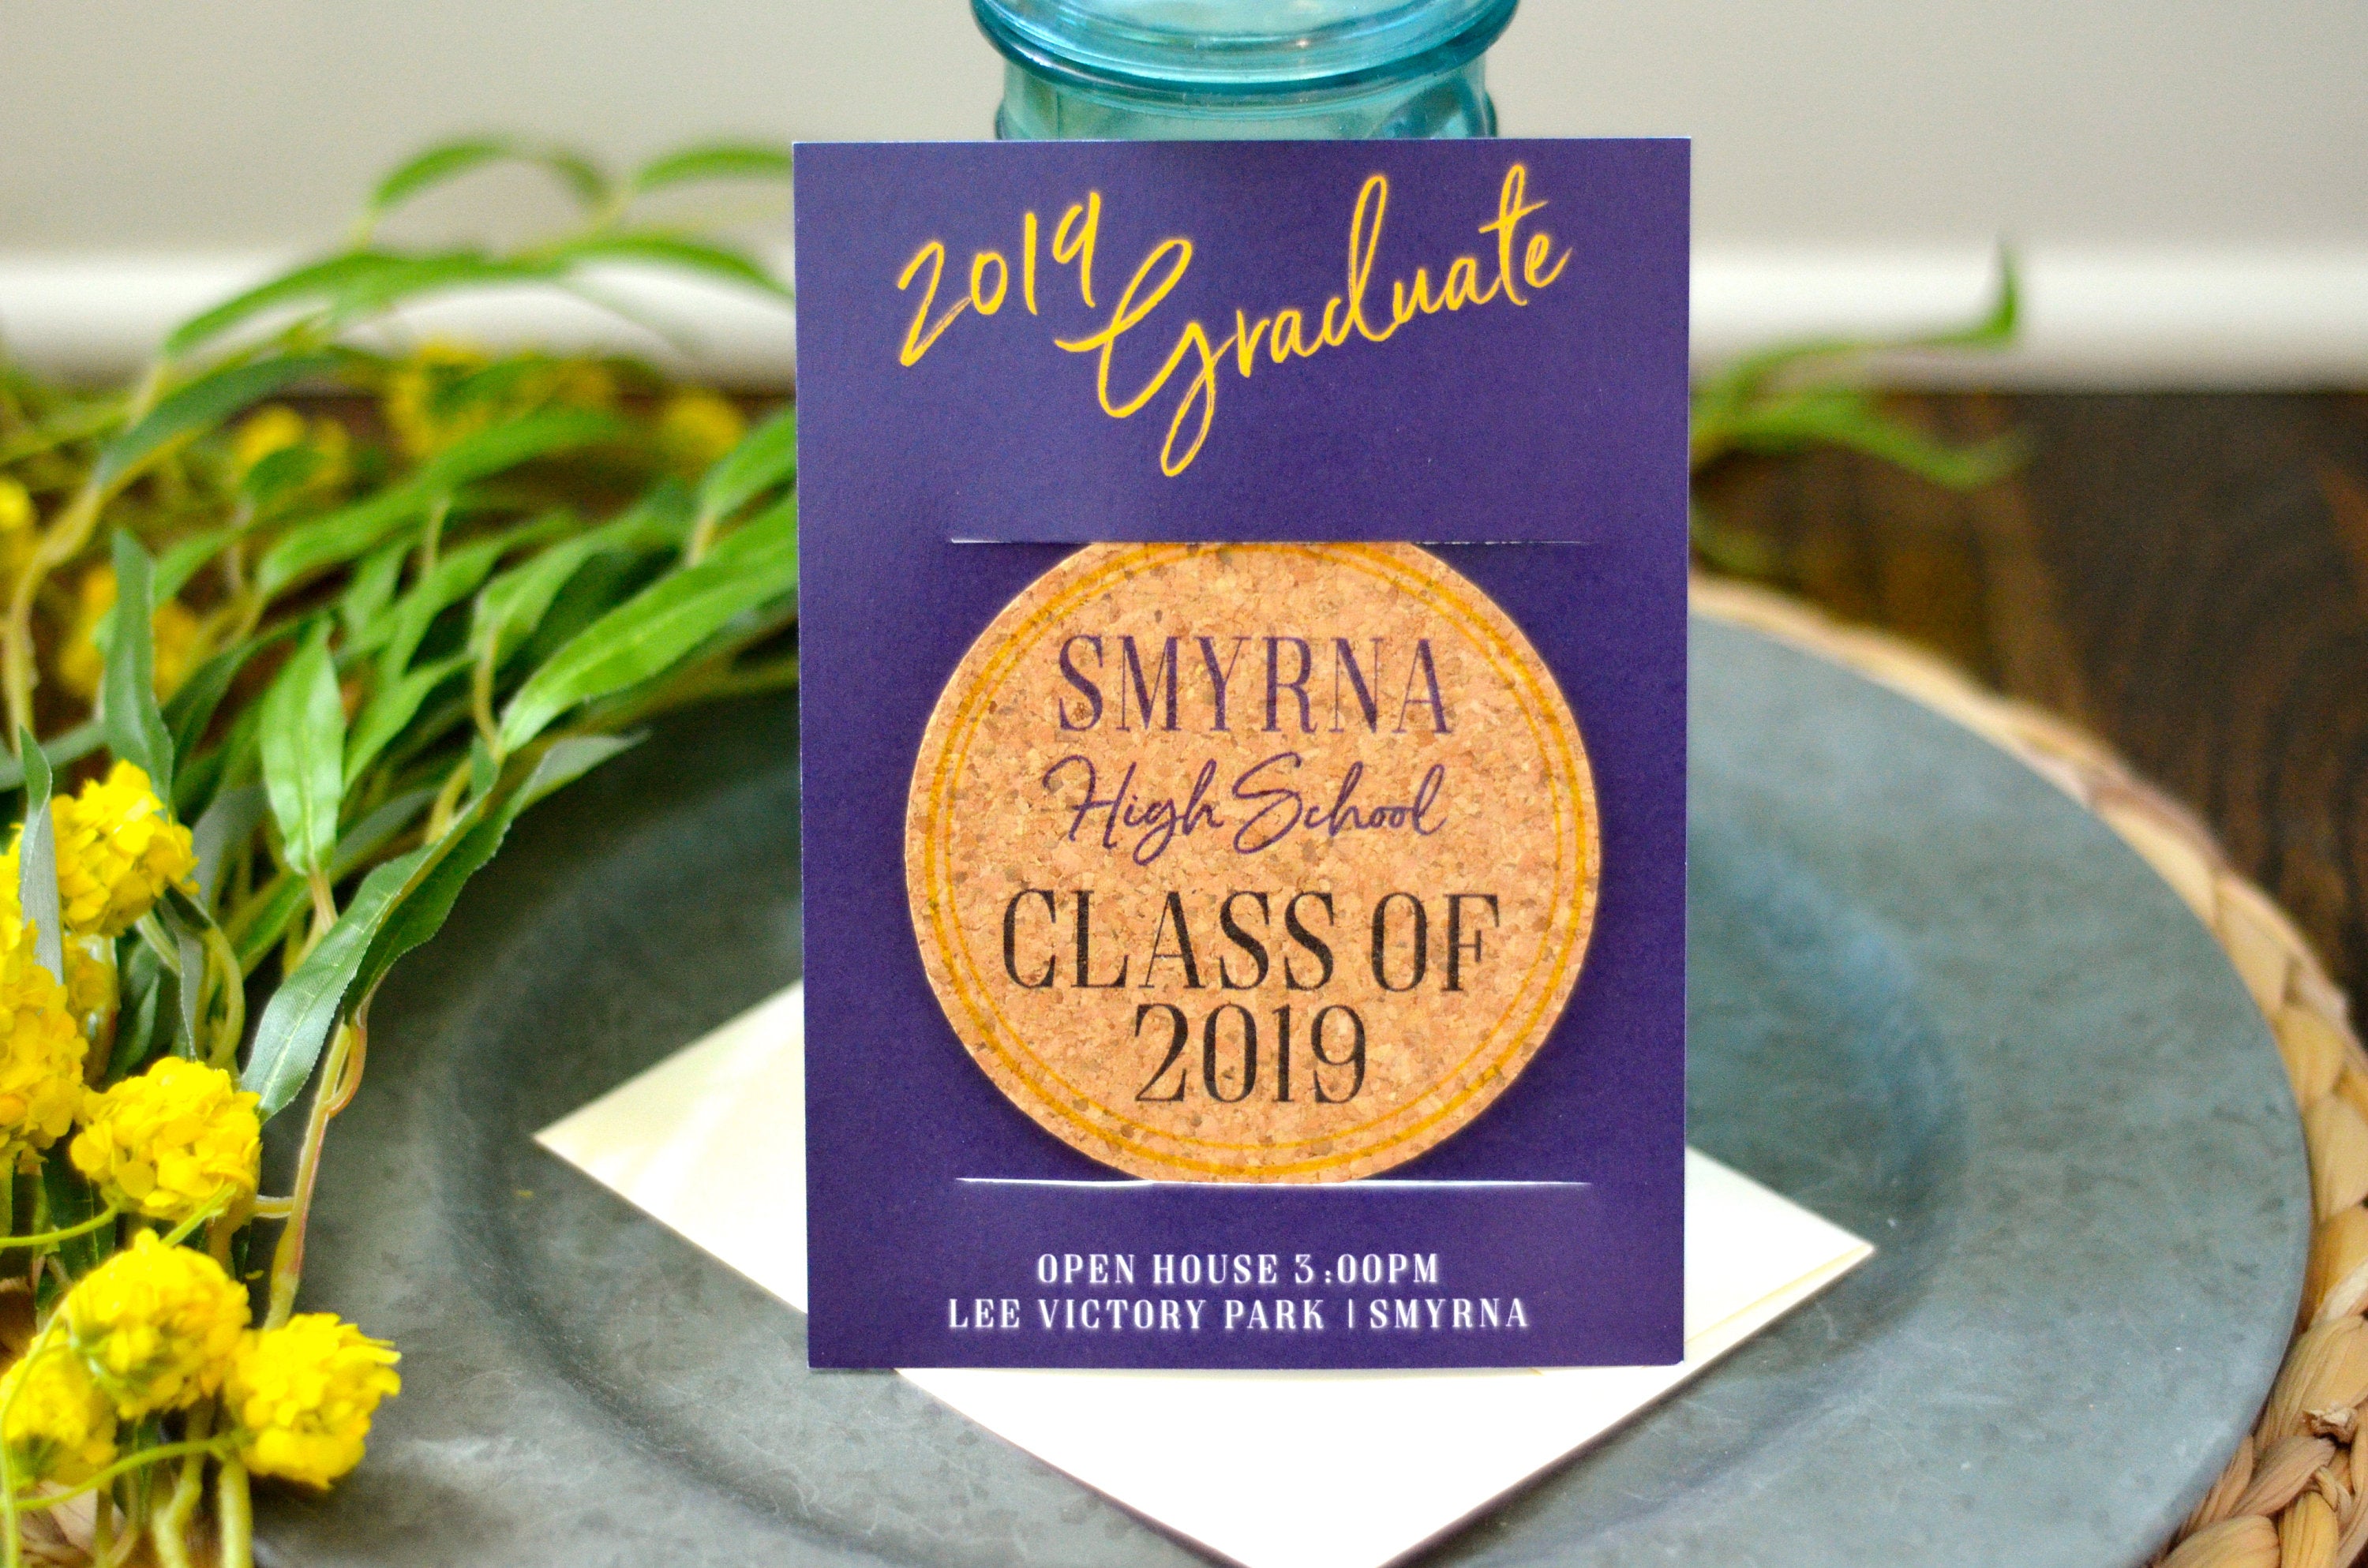 2019 Graduation Party Invitations & Announcement Purple and Gold // Photo Card Cork Coaster Save the Date with Envelopes